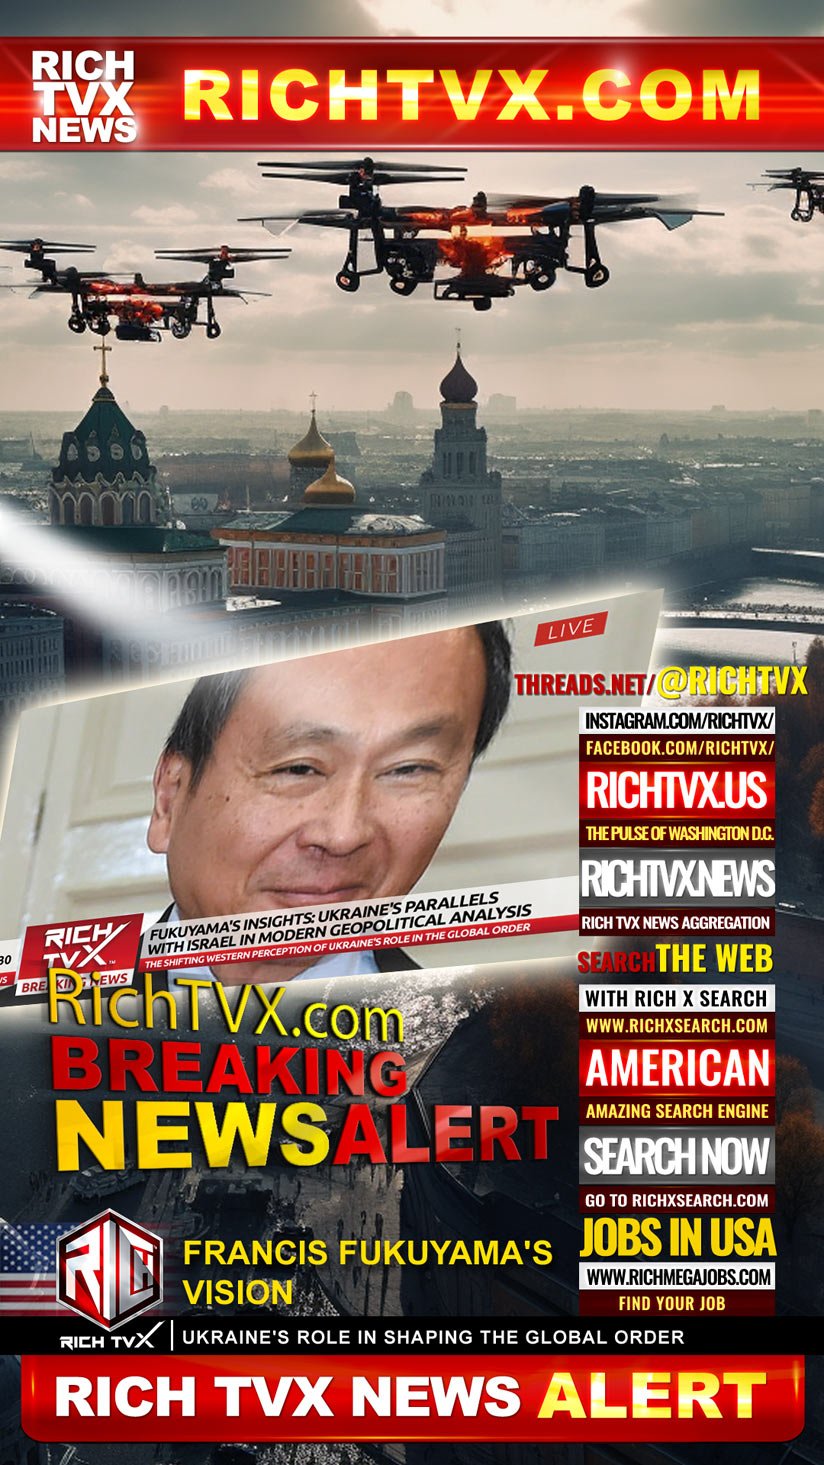 Francis Fukuyama’s Vision: Ukraine’s Role in Shaping the Global Order